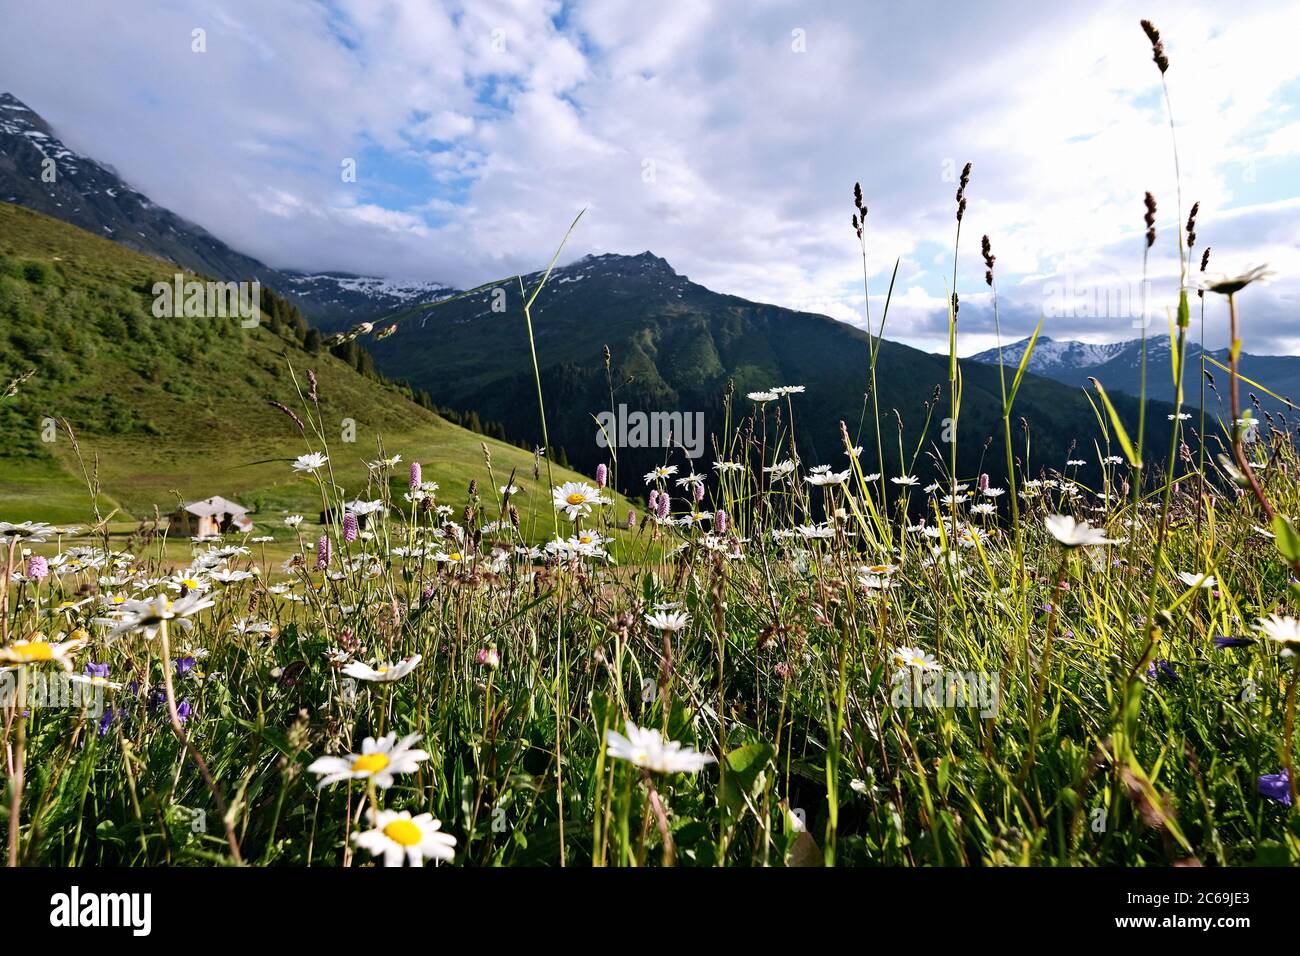 Alpine Blumen High Resolution Stock Photography and Images - Alamy